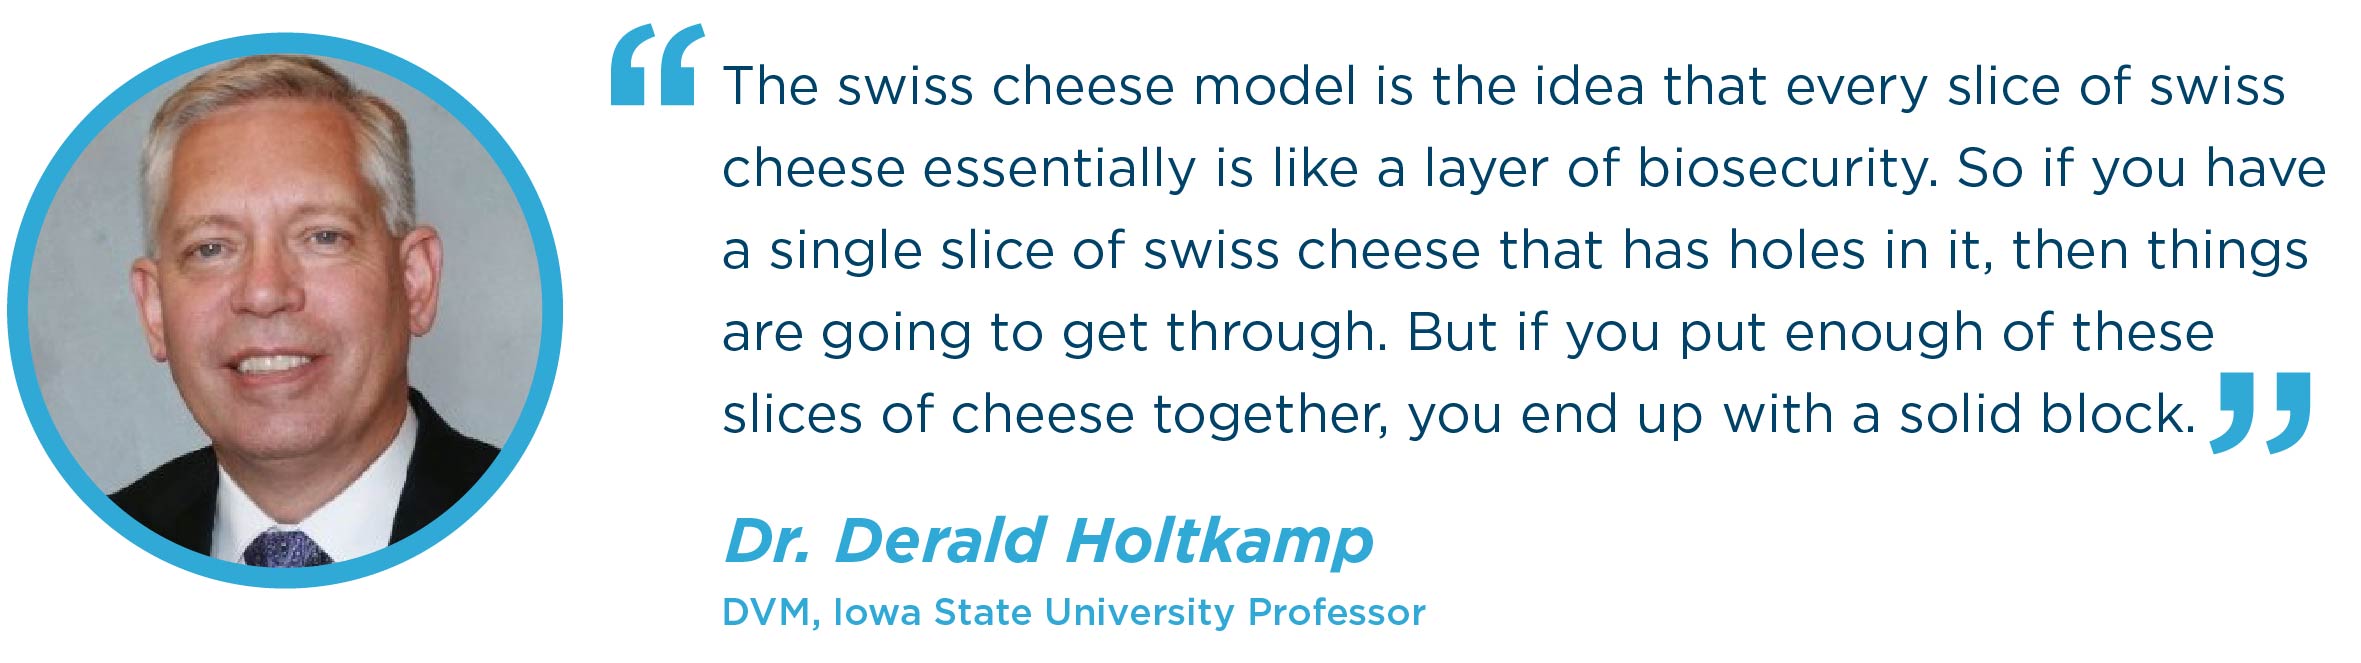 The swiss cheese model is the idea that every slice of swiss cheese essentially is like a layer of biosecurity. So if you have a single slice of swiss cheese that has holes in it, then things are going to get through. But if you put enough of these slices of cheese together, you end up with a solid block. Dr. Derald Holtkamp DVM, Iowa State University Professor